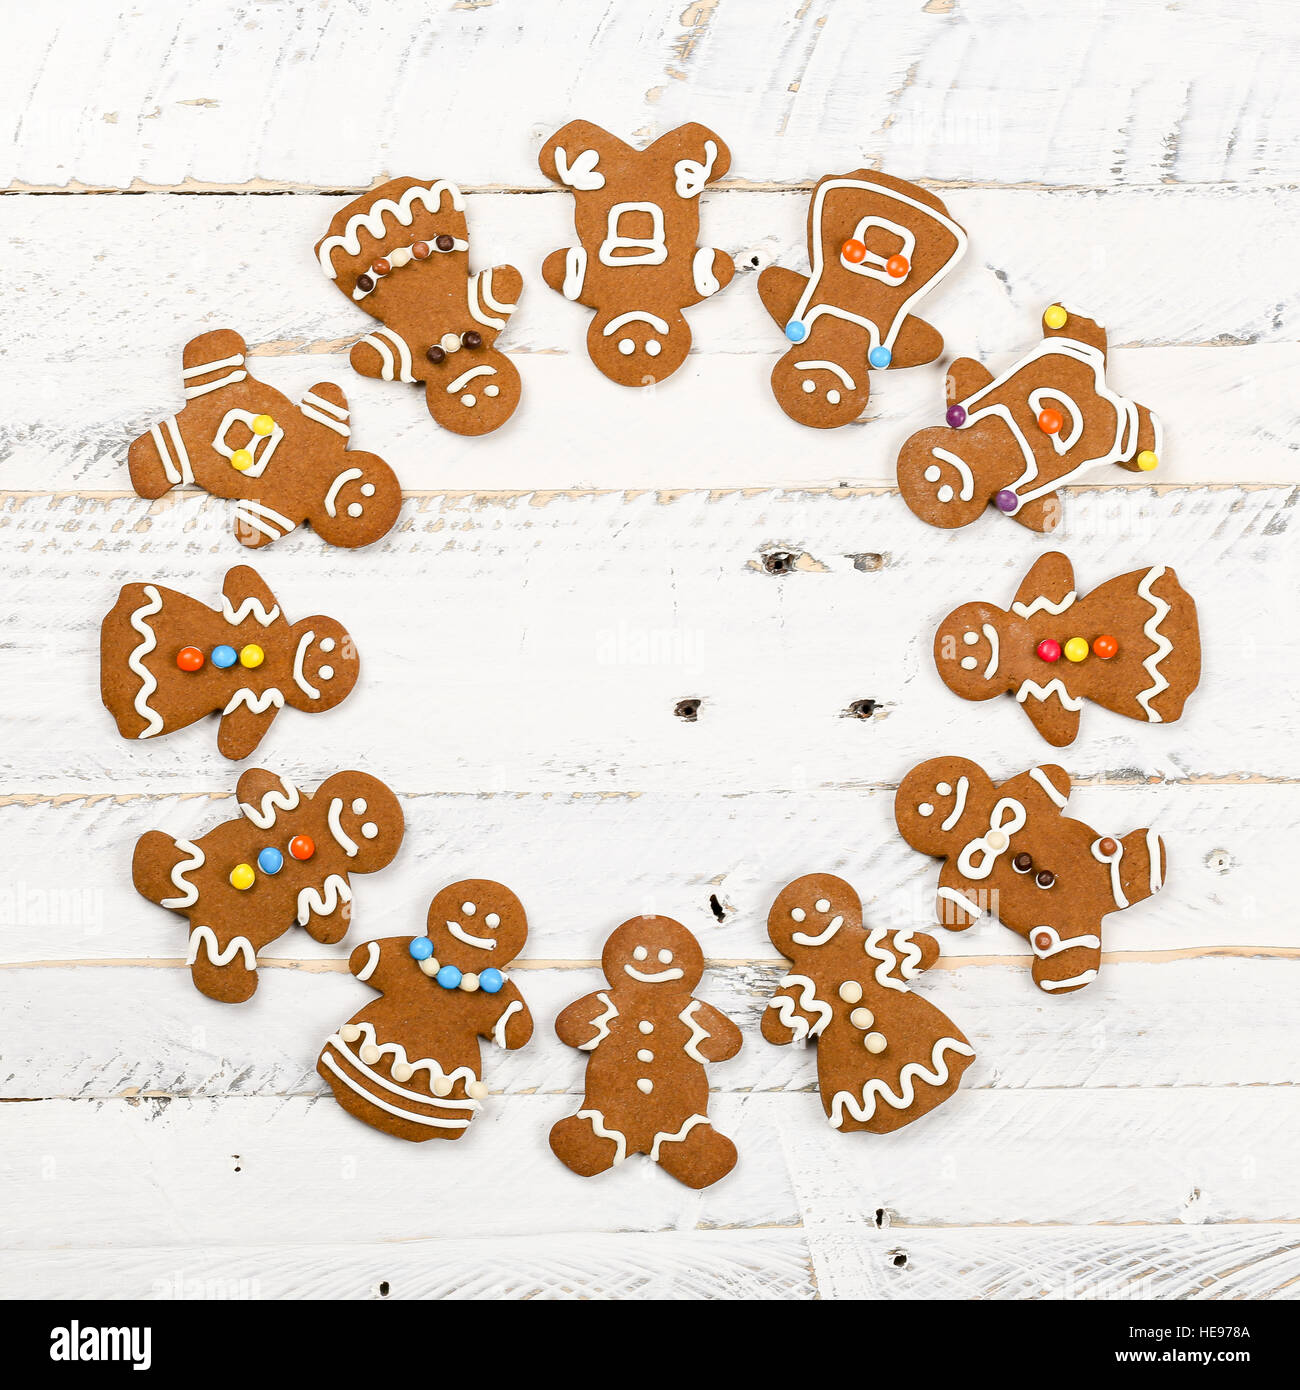 Christmas homemade gingerbread man family cookies couples on white wooden table background, International friendship concept Stock Photo